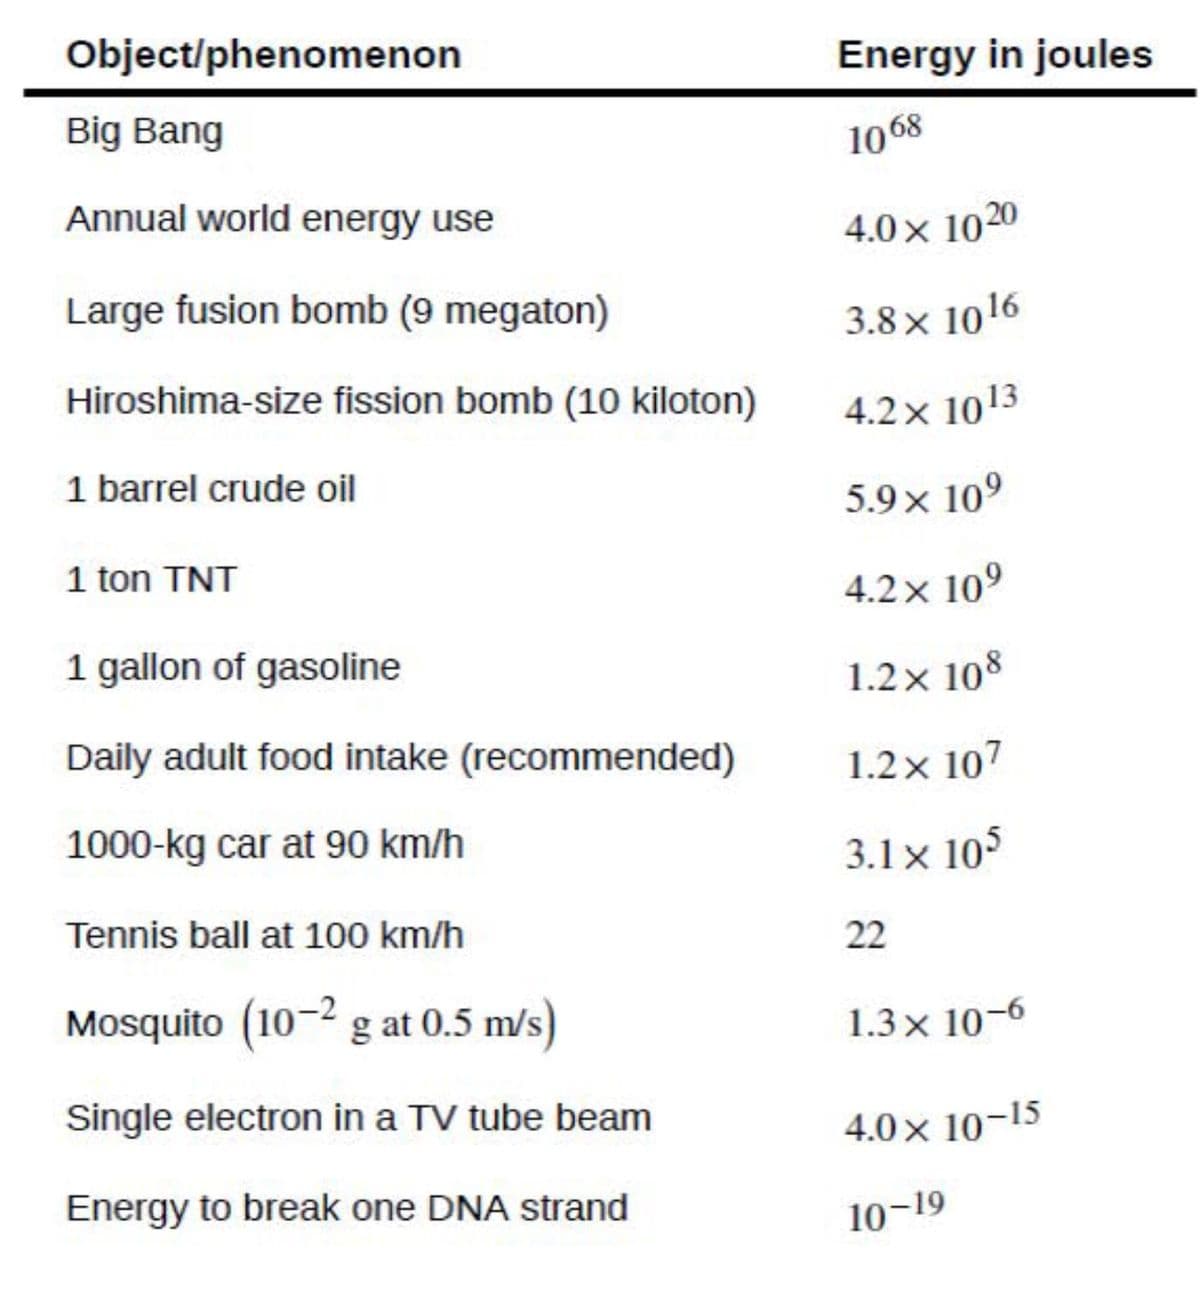 Object/phenomenon
Energy in joules
Big Bang
1068
Annual world energy use
4.0x 1020
Large fusion bomb (9 megaton)
3.8x 1016
Hiroshima-size fission bomb (10 kiloton)
4.2x 1013
1 barrel crude oil
5.9 x 10°
1 ton TNT
4.2x 10°
1 gallon of gasoline
1.2x 108
Daily adult food intake (recommended)
1.2x 107
1000-kg car at 90 km/h
3.1 × 105
Tennis ball at 100 km/h
22
Mosquito (10-2 g at 0.5 m/s)
1.3x 10-6
Single electron in a TV tube beam
4.0x 10-15
Energy to break one DNA strand
10-19
